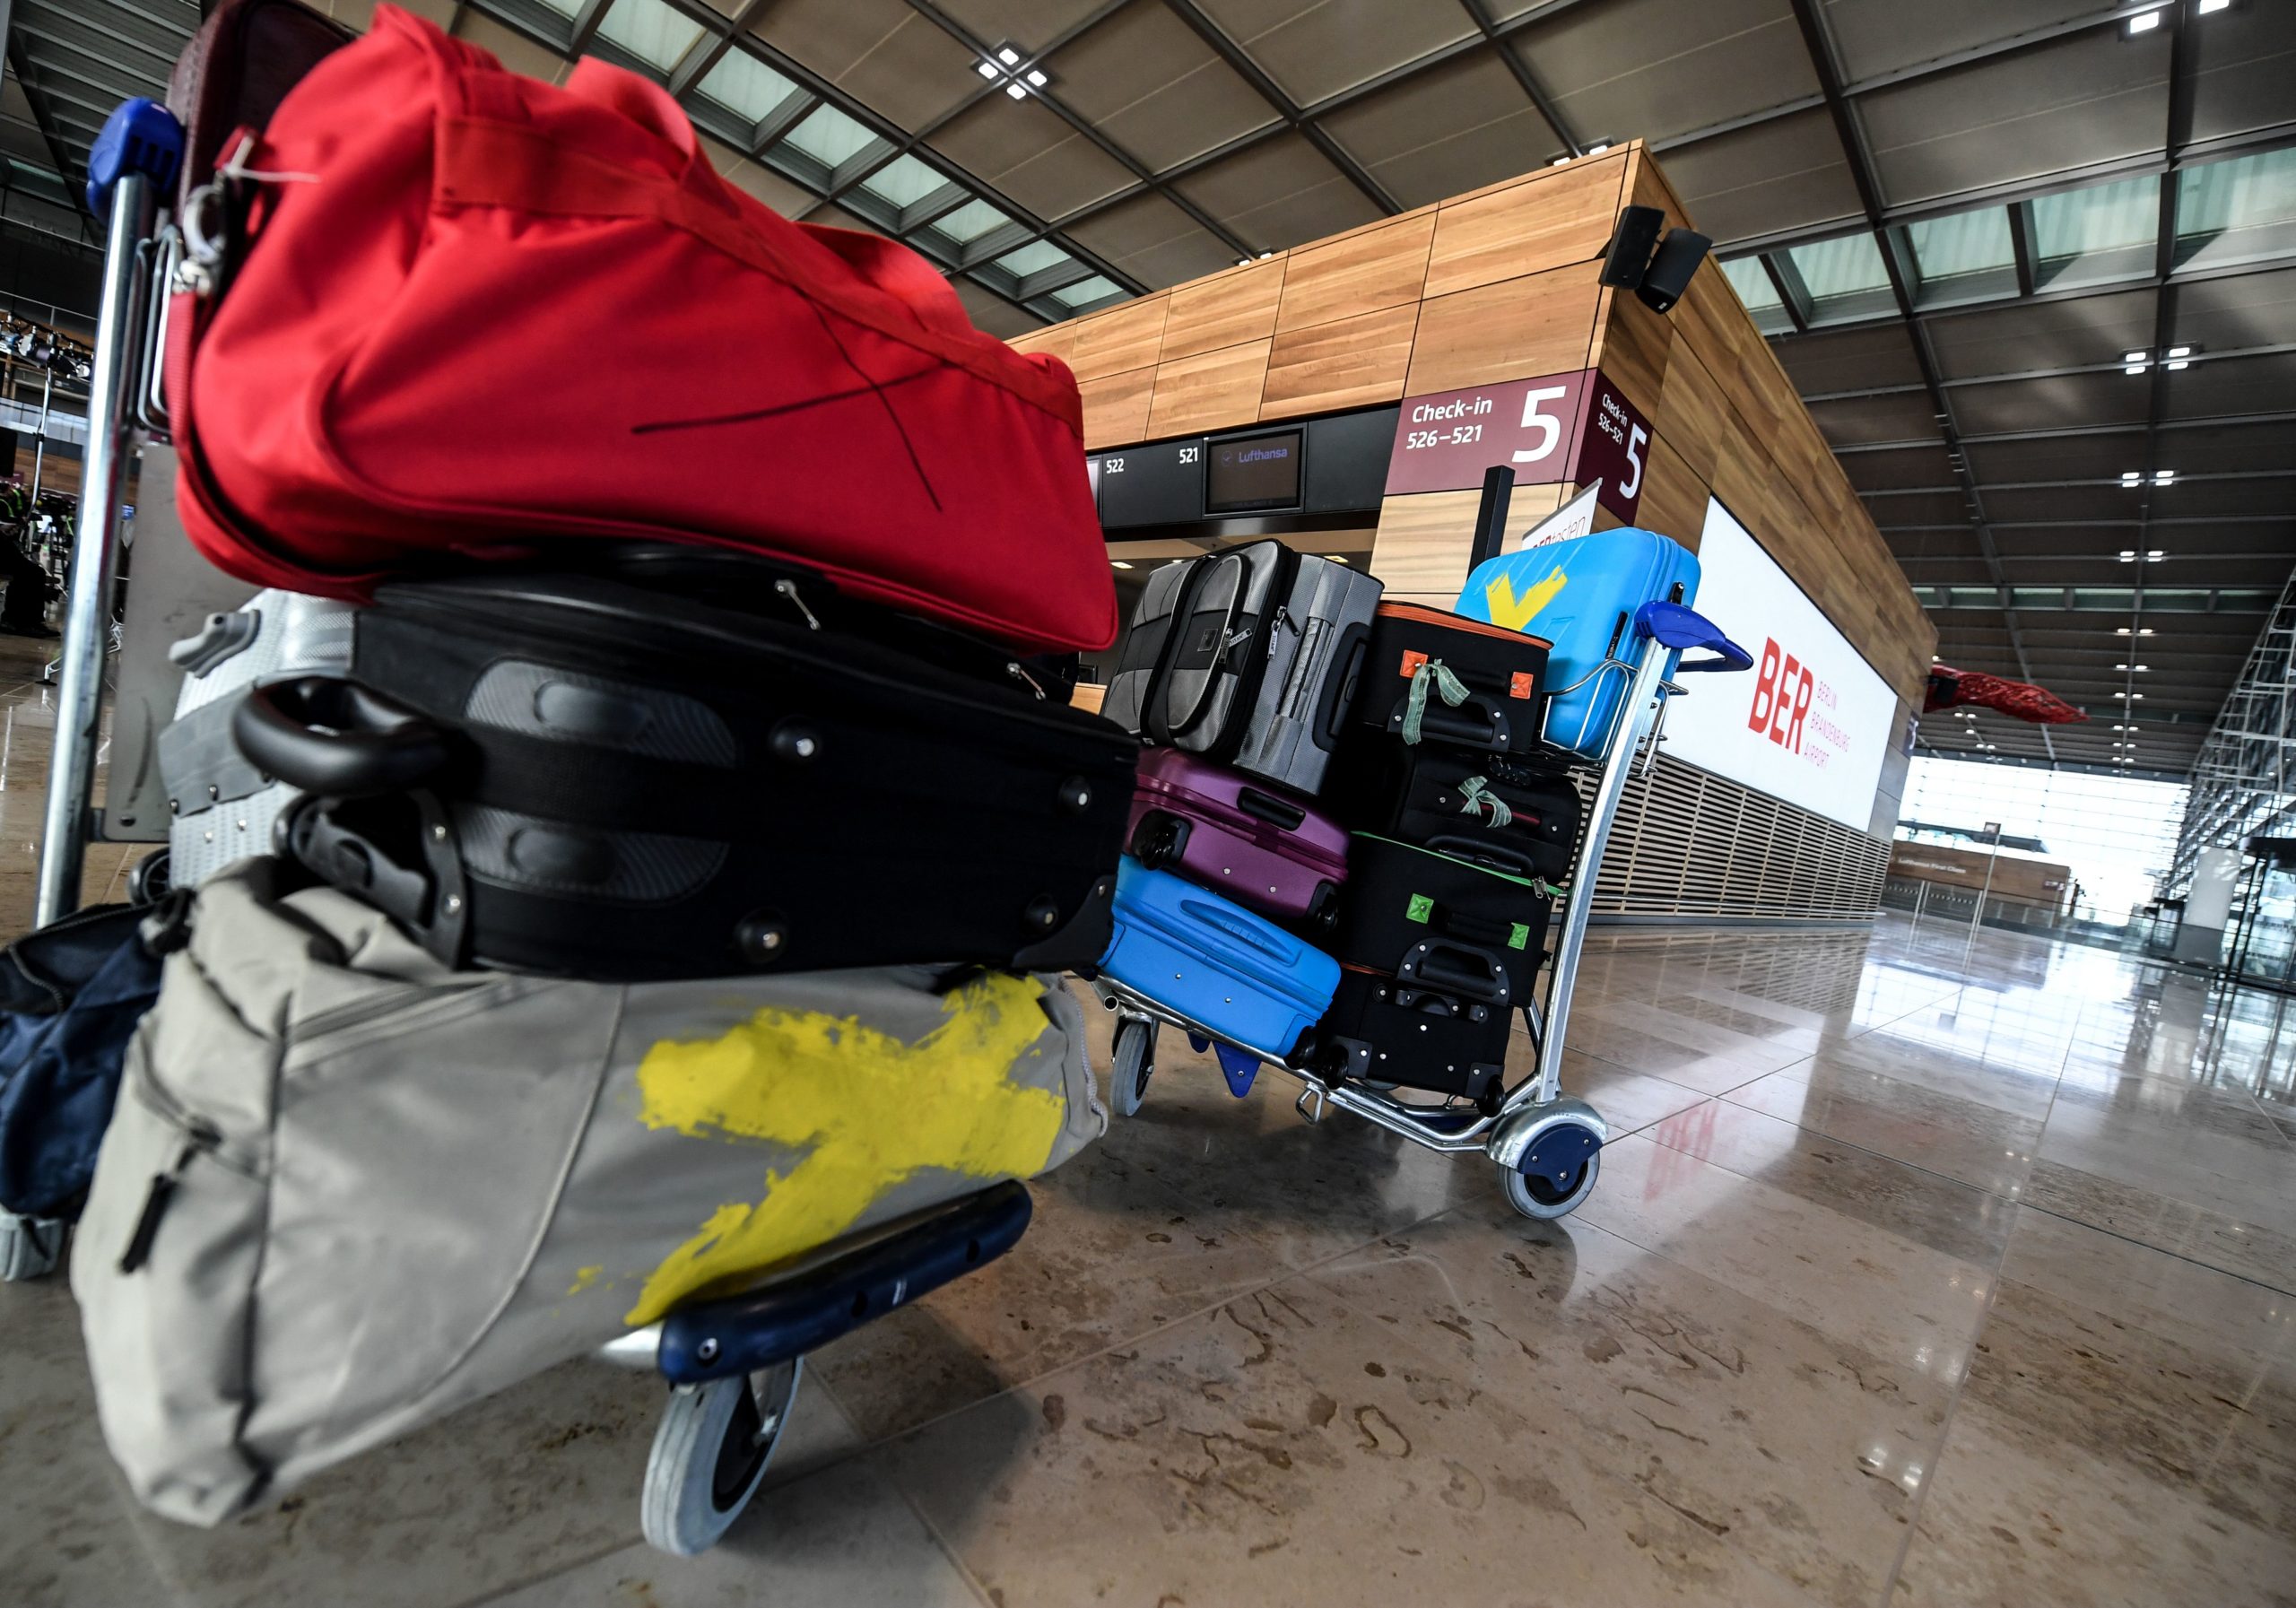 Mandatory Credit: Photo by FILIP SINGER/EPA-EFE/Shutterstock (10540429u)
A trolley with luggage at the check-in counter on the occasion of trial operation at terminal 1 of the Berlin Brandenburg Airport (BER) in Schoenefeld, Germany, 27 January 2020. Some 20,000 volunteer testers are sought for trial operation at Berlin Brandenburg Airport.The airport is expected to open in October 2020.
Berlin Brandenburg Airport trial operation, Schoenefeld, Germany - 27 Jan 2020